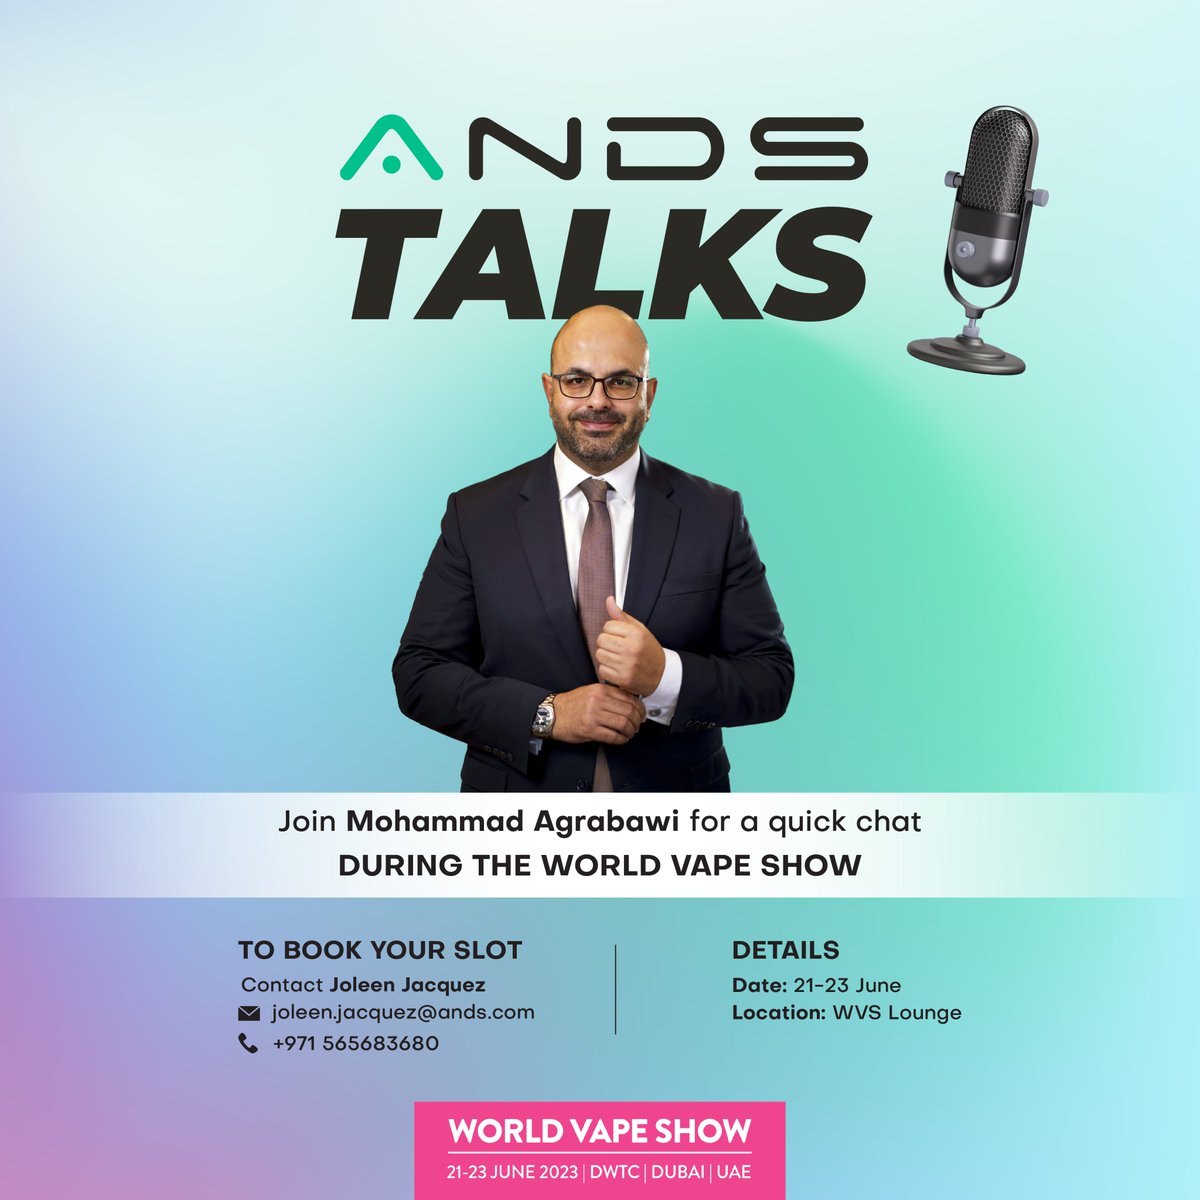 If you’re visiting the World Vape Show, join us at ANDS Talks and have a quick chat with Mohammad Agrabawi. Book your slot now!

haven’t registered yet? get your FREE ticket now >> bit.ly/42o2SeG
 #worldvapeshow #wvsdubai #ands